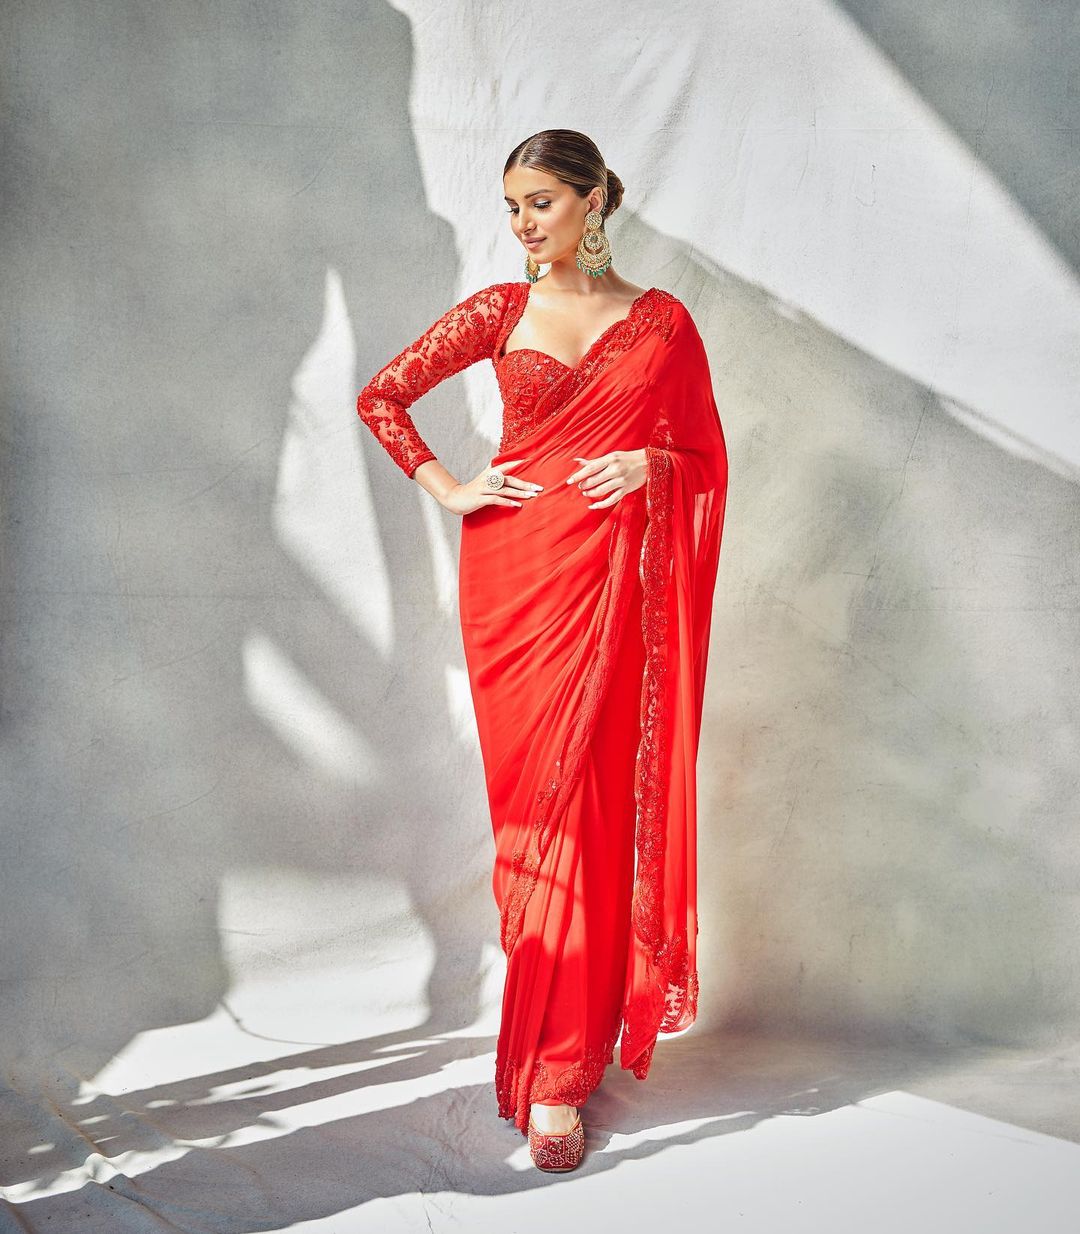 Tara Sutaria Is A Picture Of Elegance In Red Saree